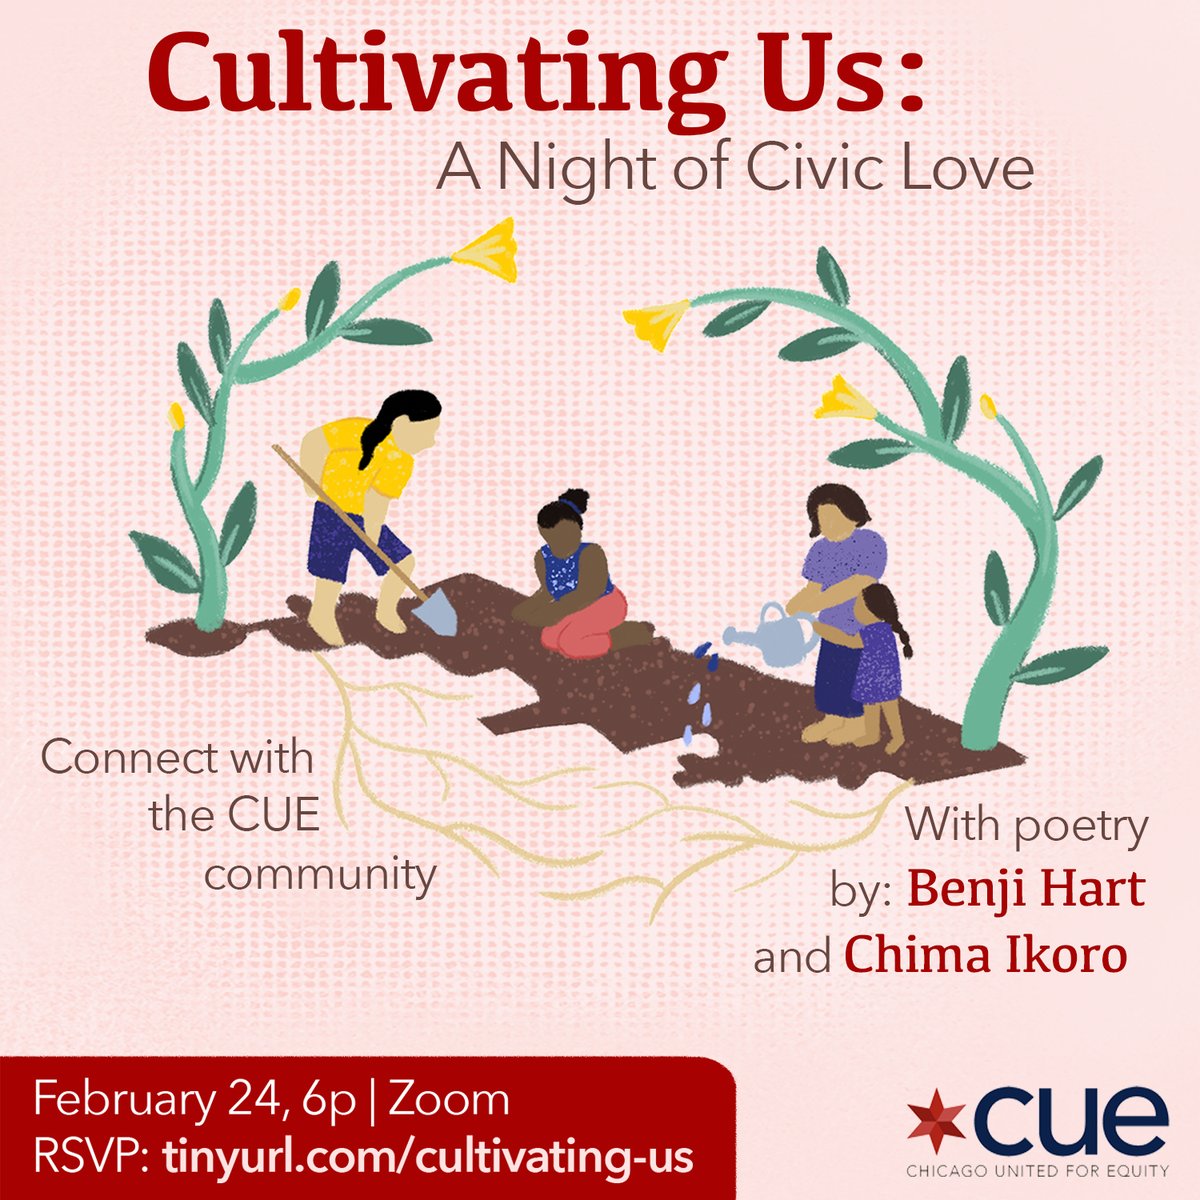 TONIGHT! 

Join us for a very special #CivicLove celebration! Catch up with the #CUECommunity & don’t miss performances by featured guests @supernaira and @radfagg

There’s still time to RSVP 👉 tinyurl.com/cultivating-us